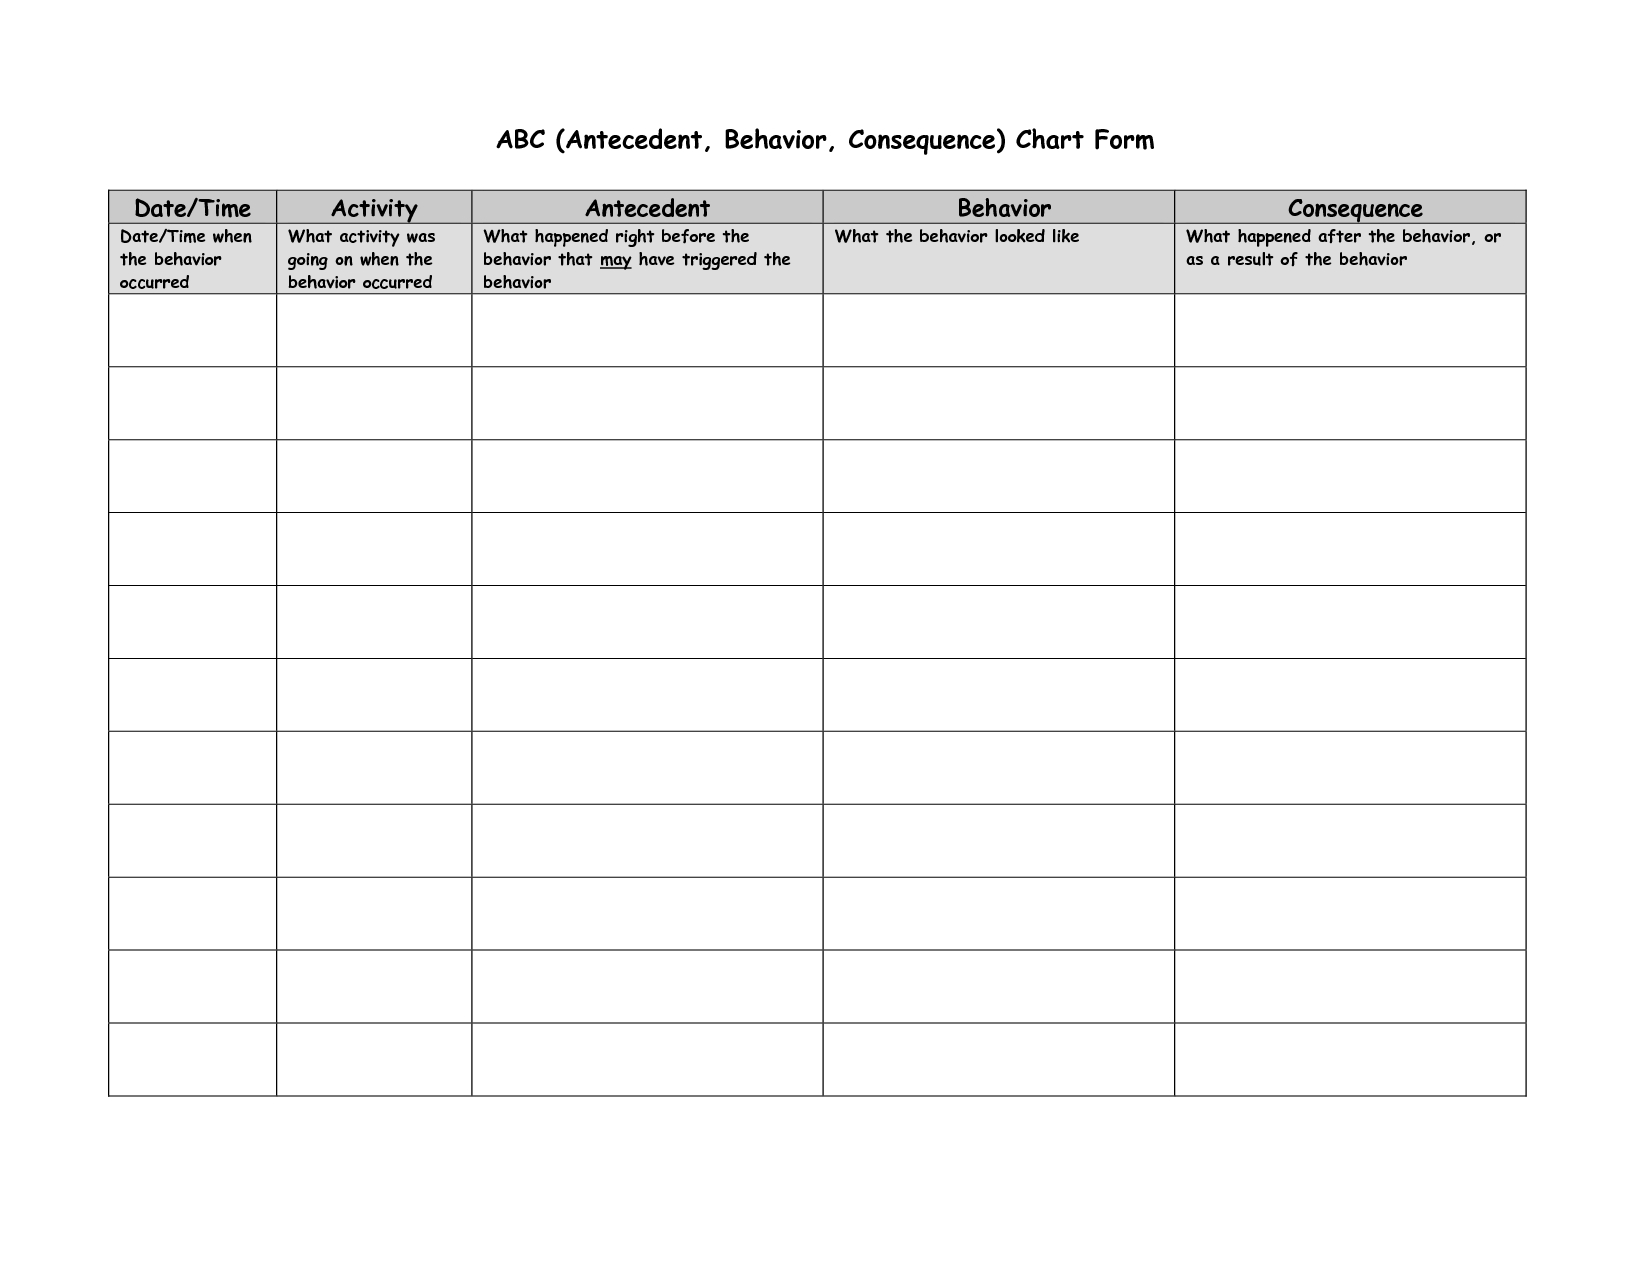 Image Result For Free Printable Tracking Behavior Forms | Behavior in Free Printable Behavior Charts Pbis